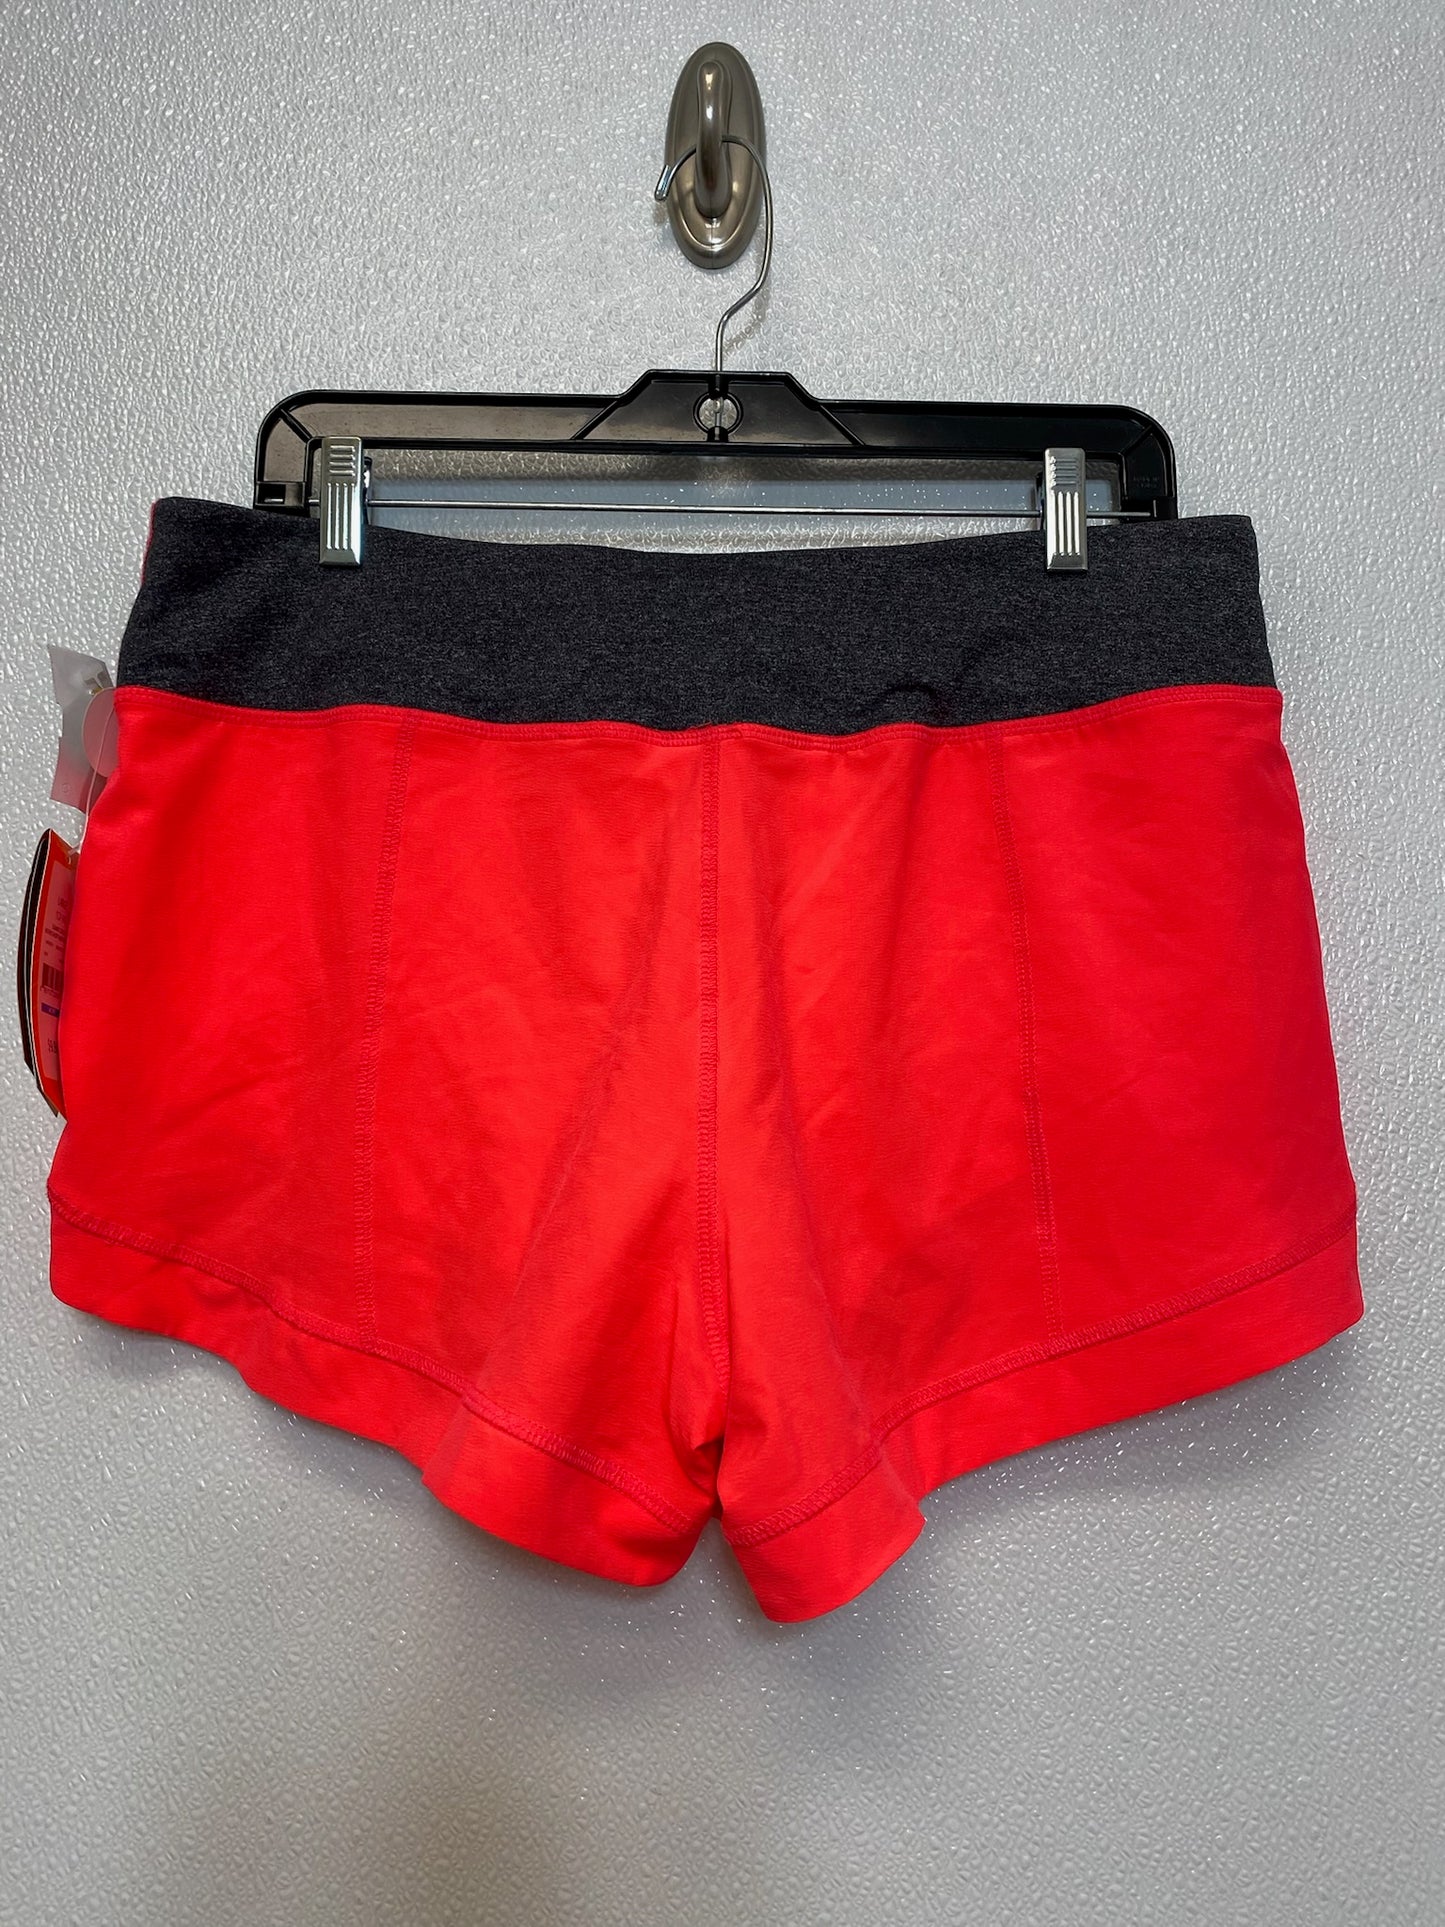 Athletic Shorts By Avia  Size: L